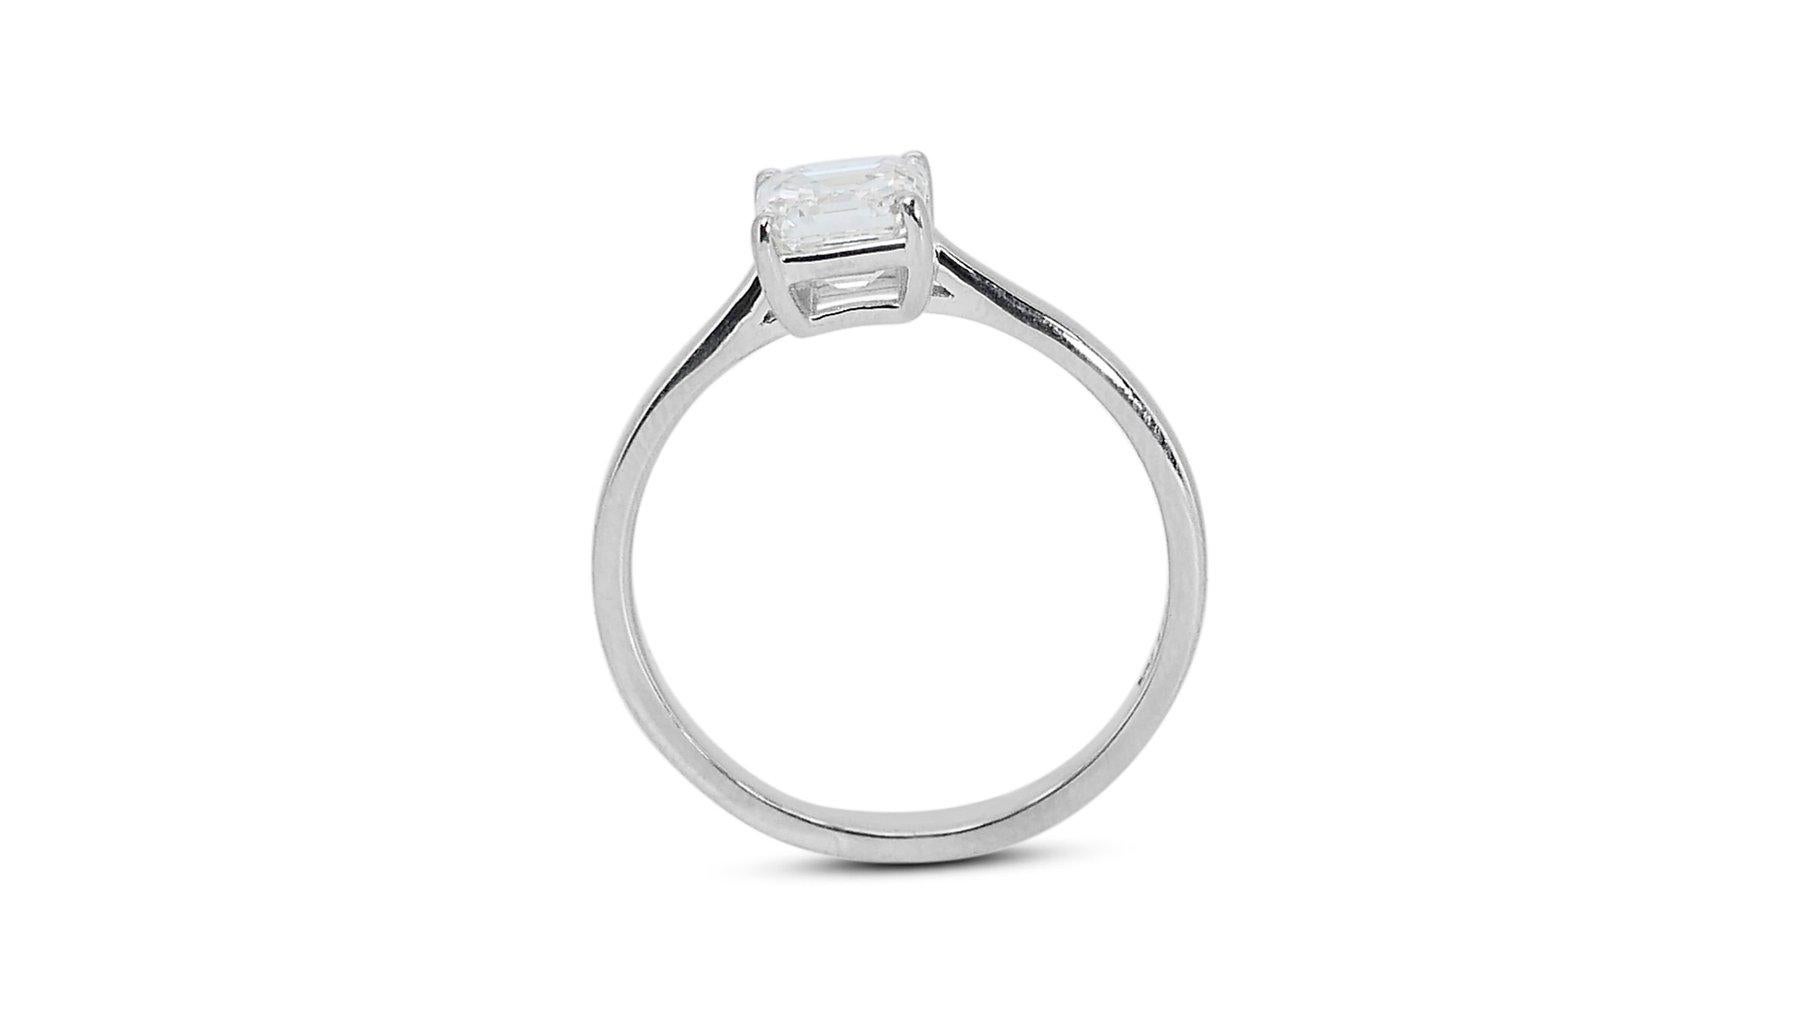 Luminous 1.00ct Diamond Solitaire Ring in 18k White Gold - GIA Certified For Sale 1